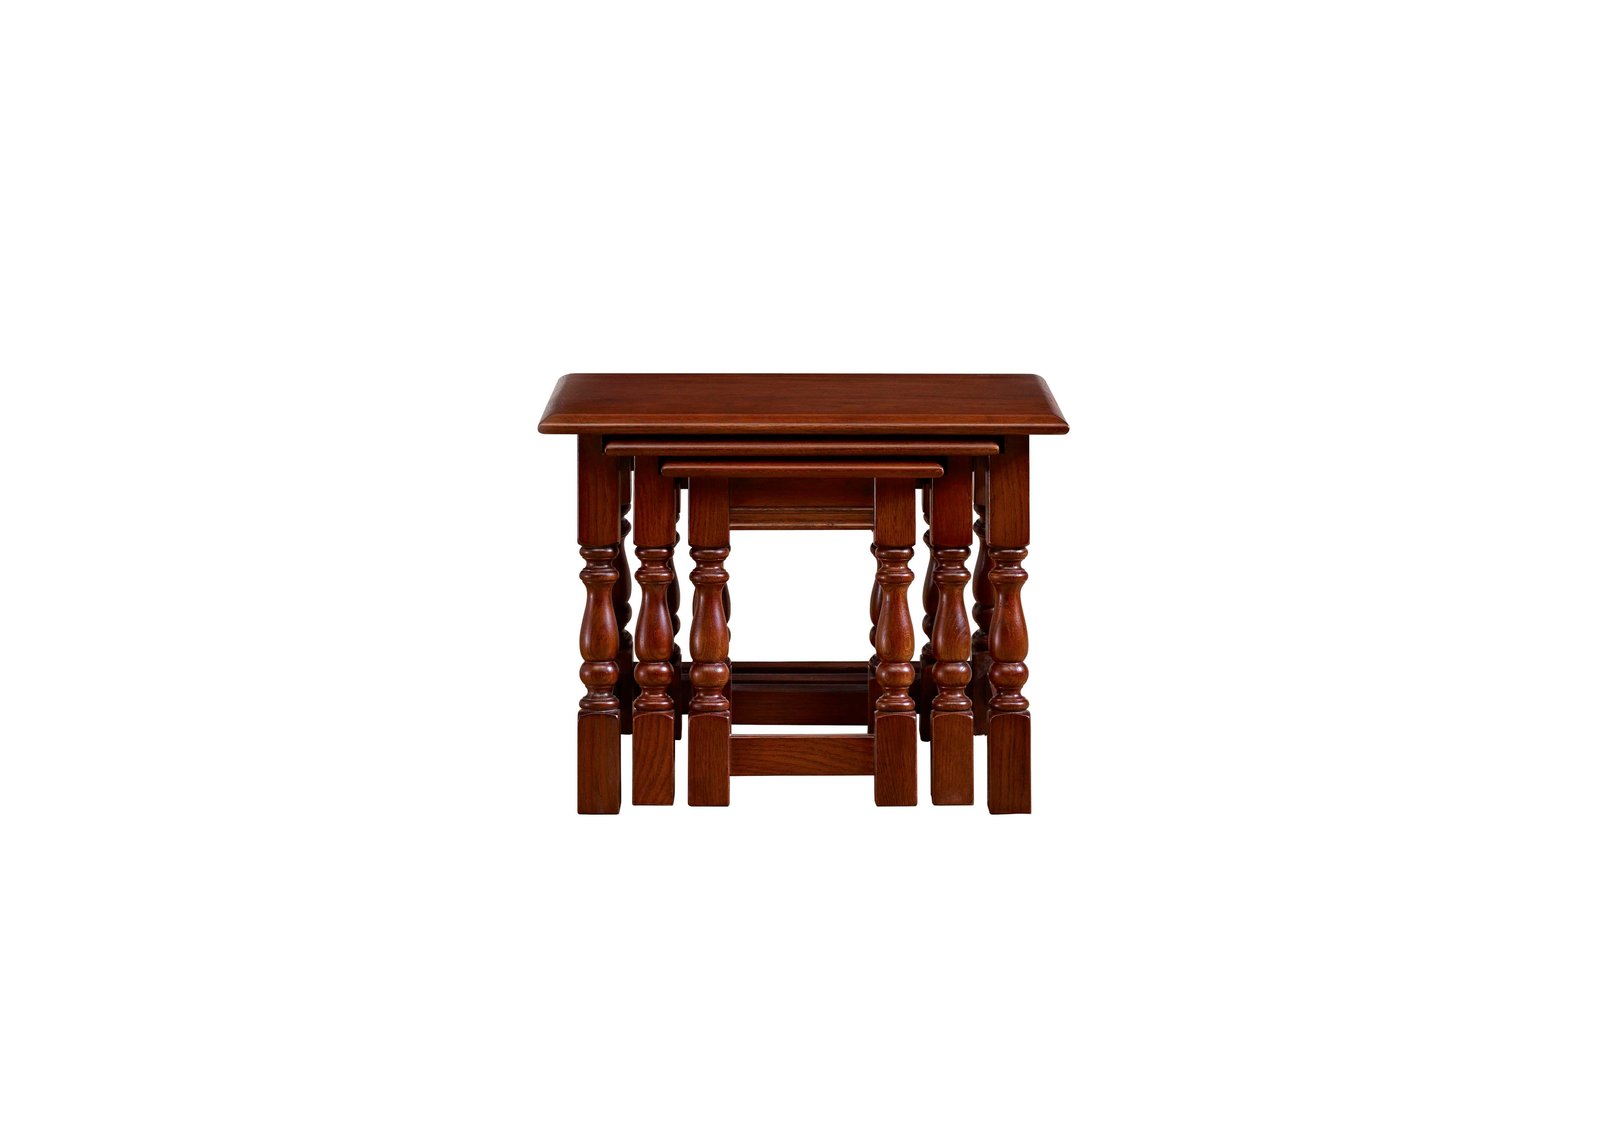 Old Charm Nest Of Tables in Tudor Brown - Traditional on Furniture Village